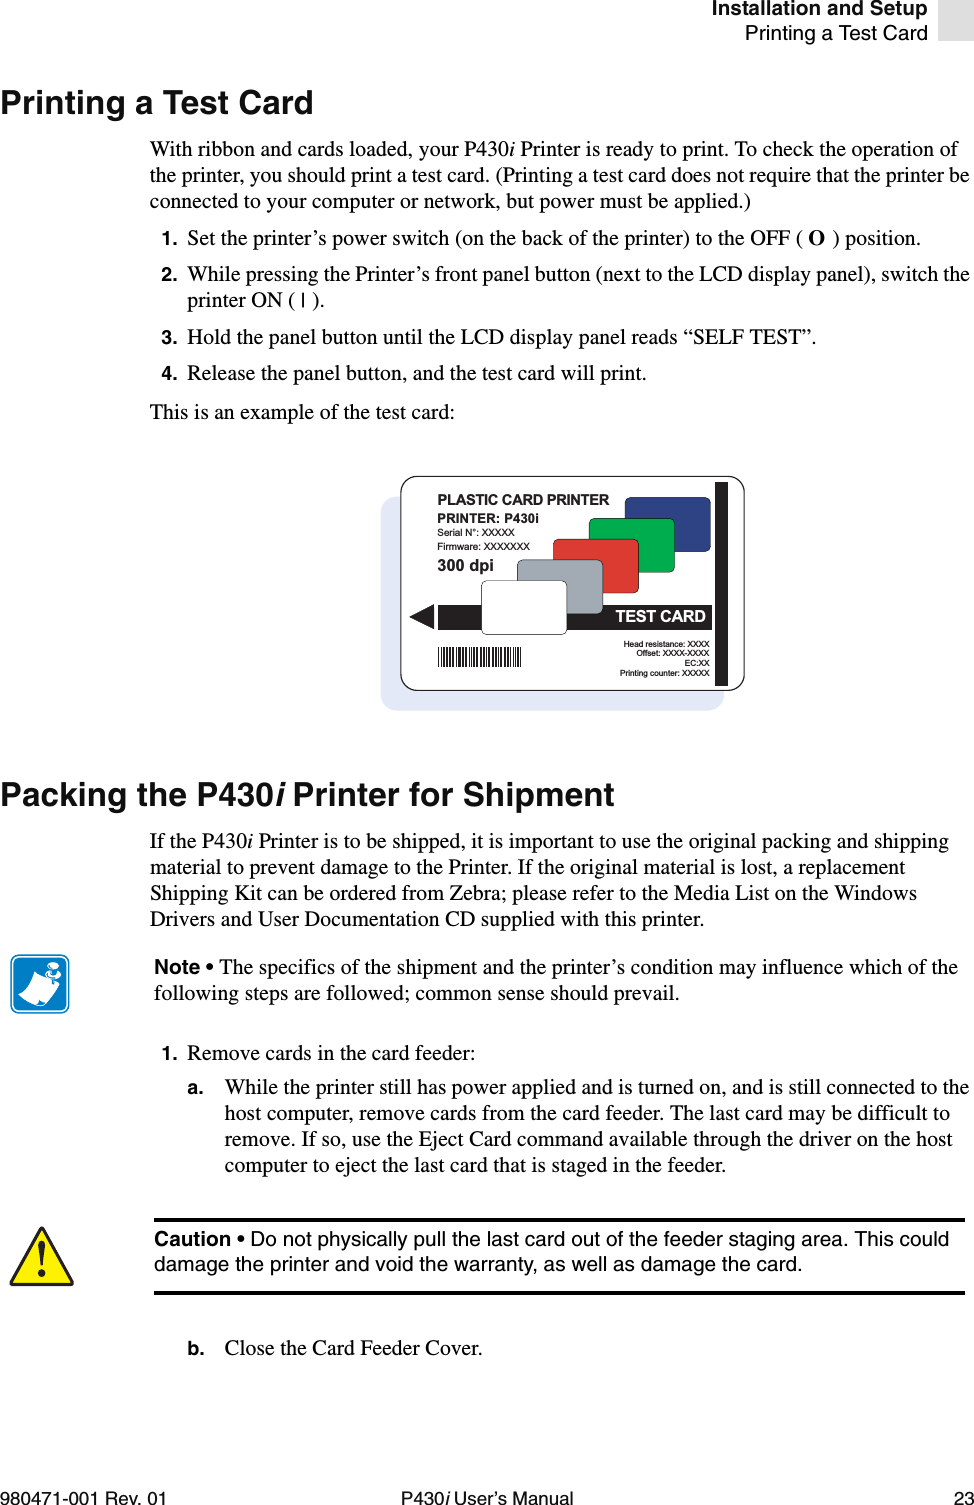 Installation and SetupPrinting a Test Card980471-001 Rev. 01 P430i User’s Manual 23Printing a Test CardWith ribbon and cards loaded, your P430i Printer is ready to print. To check the operation of the printer, you should print a test card. (Printing a test card does not require that the printer be connected to your computer or network, but power must be applied.)1. Set the printer’s power switch (on the back of the printer) to the OFF ( O ) position.2. While pressing the Printer’s front panel button (next to the LCD display panel), switch the printer ON ( | ).3. Hold the panel button until the LCD display panel reads “SELF TEST”.4. Release the panel button, and the test card will print.This is an example of the test card:Packing the P430i Printer for ShipmentIf the P430i Printer is to be shipped, it is important to use the original packing and shipping material to prevent damage to the Printer. If the original material is lost, a replacement Shipping Kit can be ordered from Zebra; please refer to the Media List on the Windows Drivers and User Documentation CD supplied with this printer.1. Remove cards in the card feeder:a. While the printer still has power applied and is turned on, and is still connected to the host computer, remove cards from the card feeder. The last card may be difficult to remove. If so, use the Eject Card command available through the driver on the host computer to eject the last card that is staged in the feeder.b. Close the Card Feeder Cover.PRINTER: P430iSerial N°: XXXXXFirmware: XXXXXXXHead resistance: XXXXOffset: XXXX-XXXXEC:XXPrinting counter: XXXXX300 dpiPLASTIC CARD PRINTERTEST CARDNote • The specifics of the shipment and the printer’s condition may influence which of the following steps are followed; common sense should prevail.Caution • Do not physically pull the last card out of the feeder staging area. This could damage the printer and void the warranty, as well as damage the card.